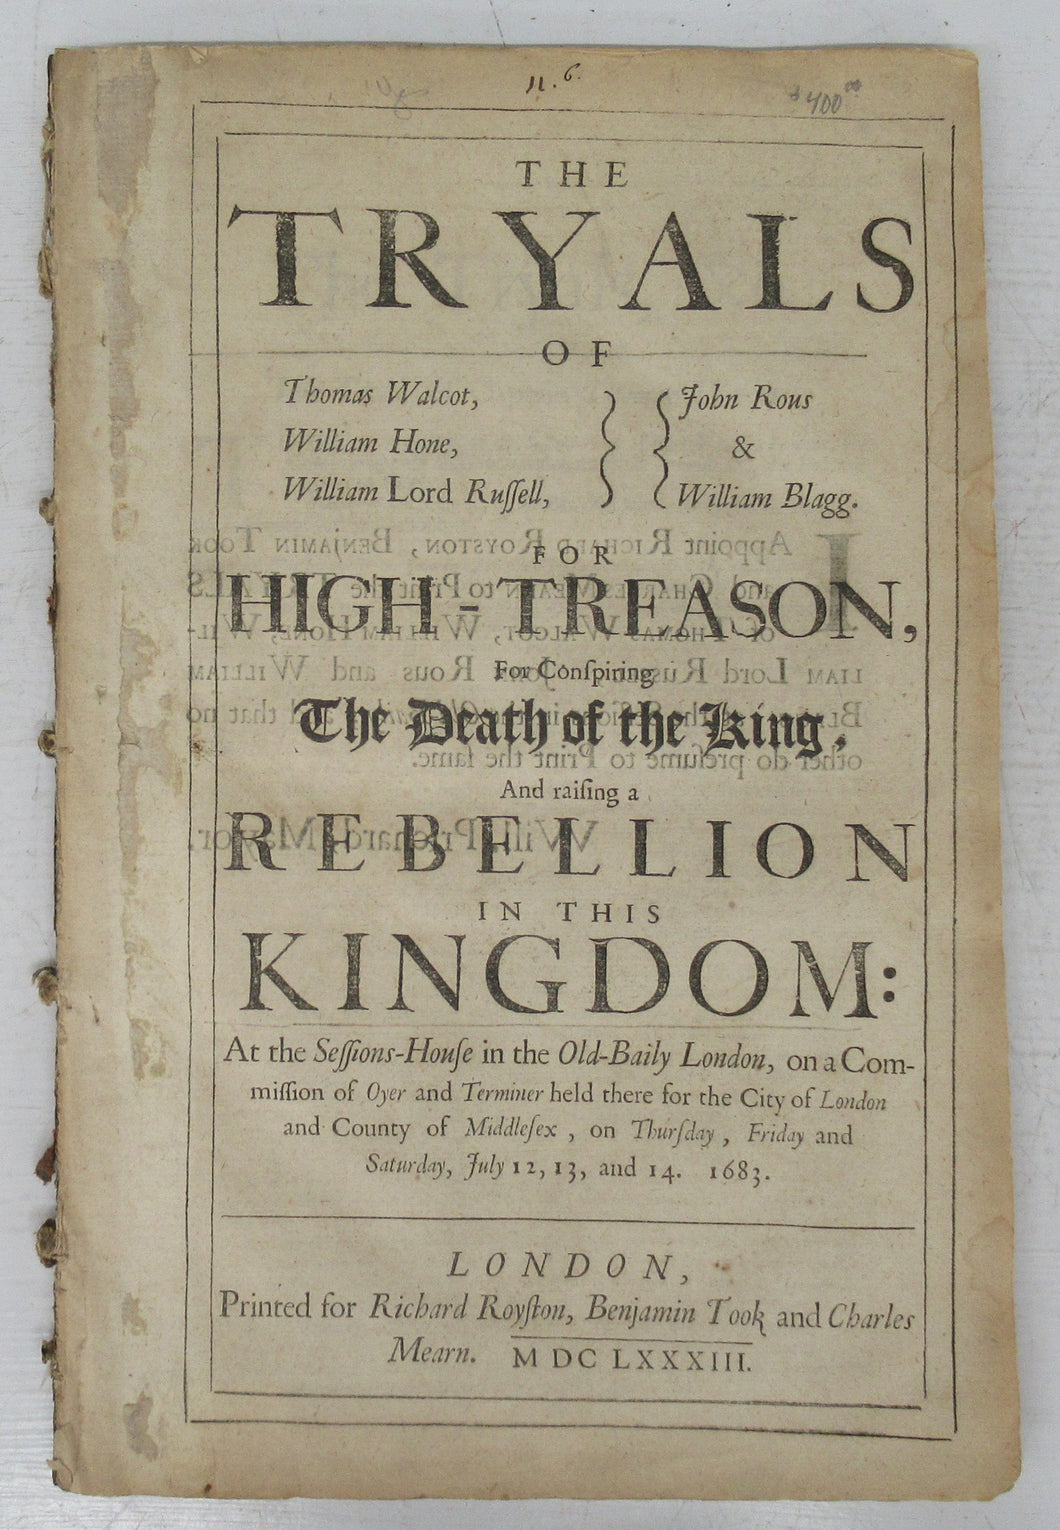 The Tryals of Thomas Walcot, William Hone, William Lord Russell, John Rous & William Blagg for High-Treason